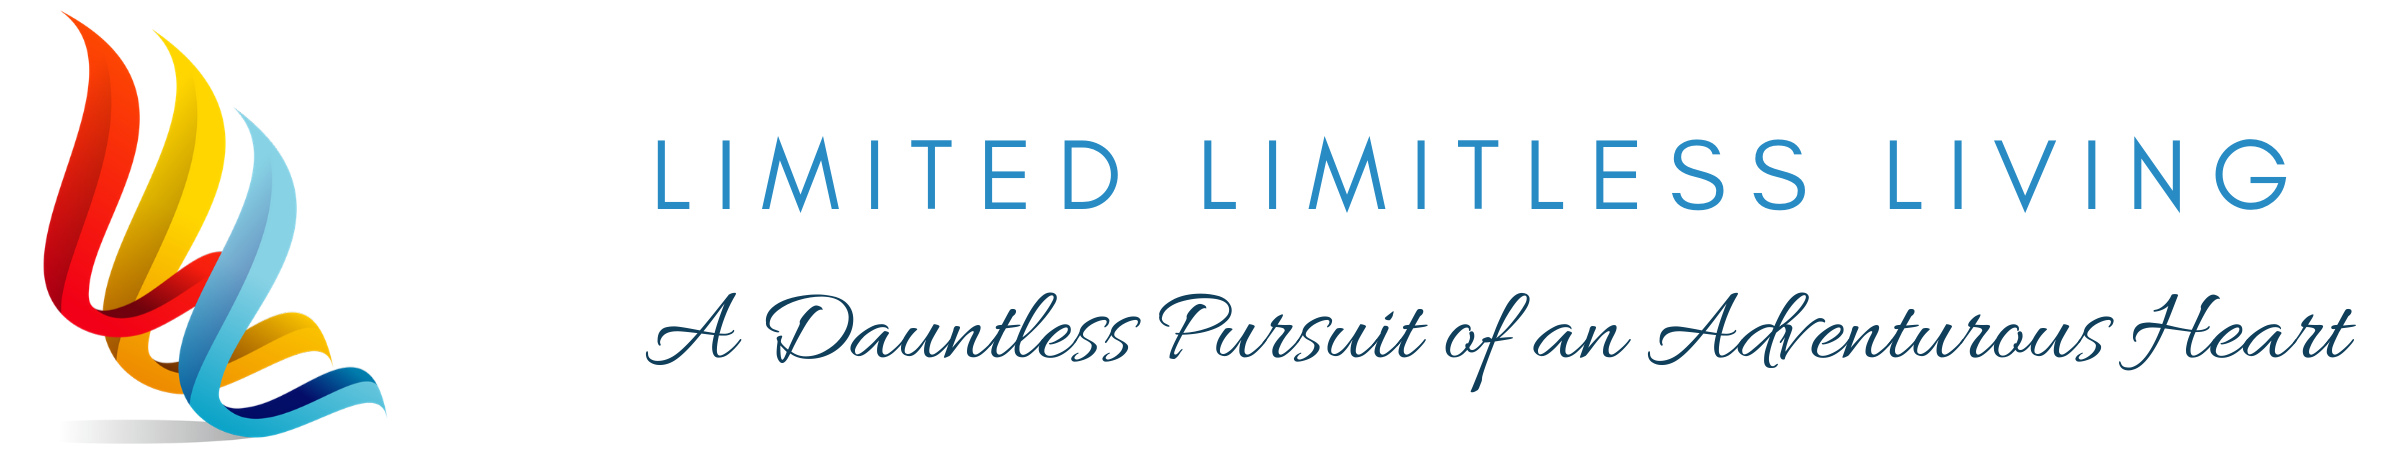 Limited Limitless Living